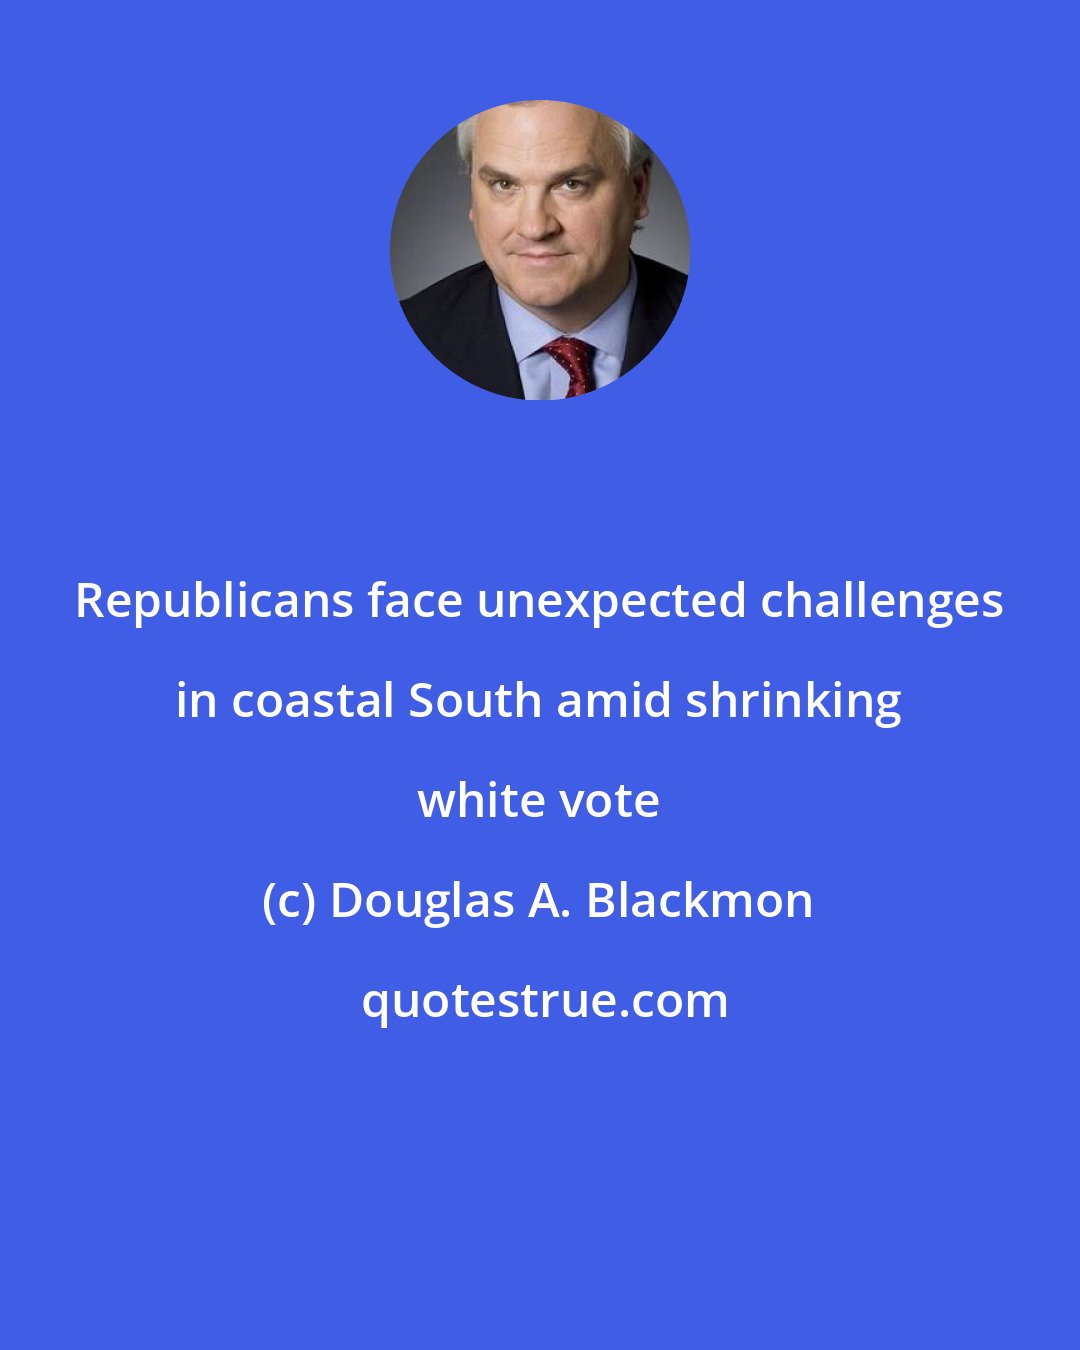 Douglas A. Blackmon: Republicans face unexpected challenges in coastal South amid shrinking white vote